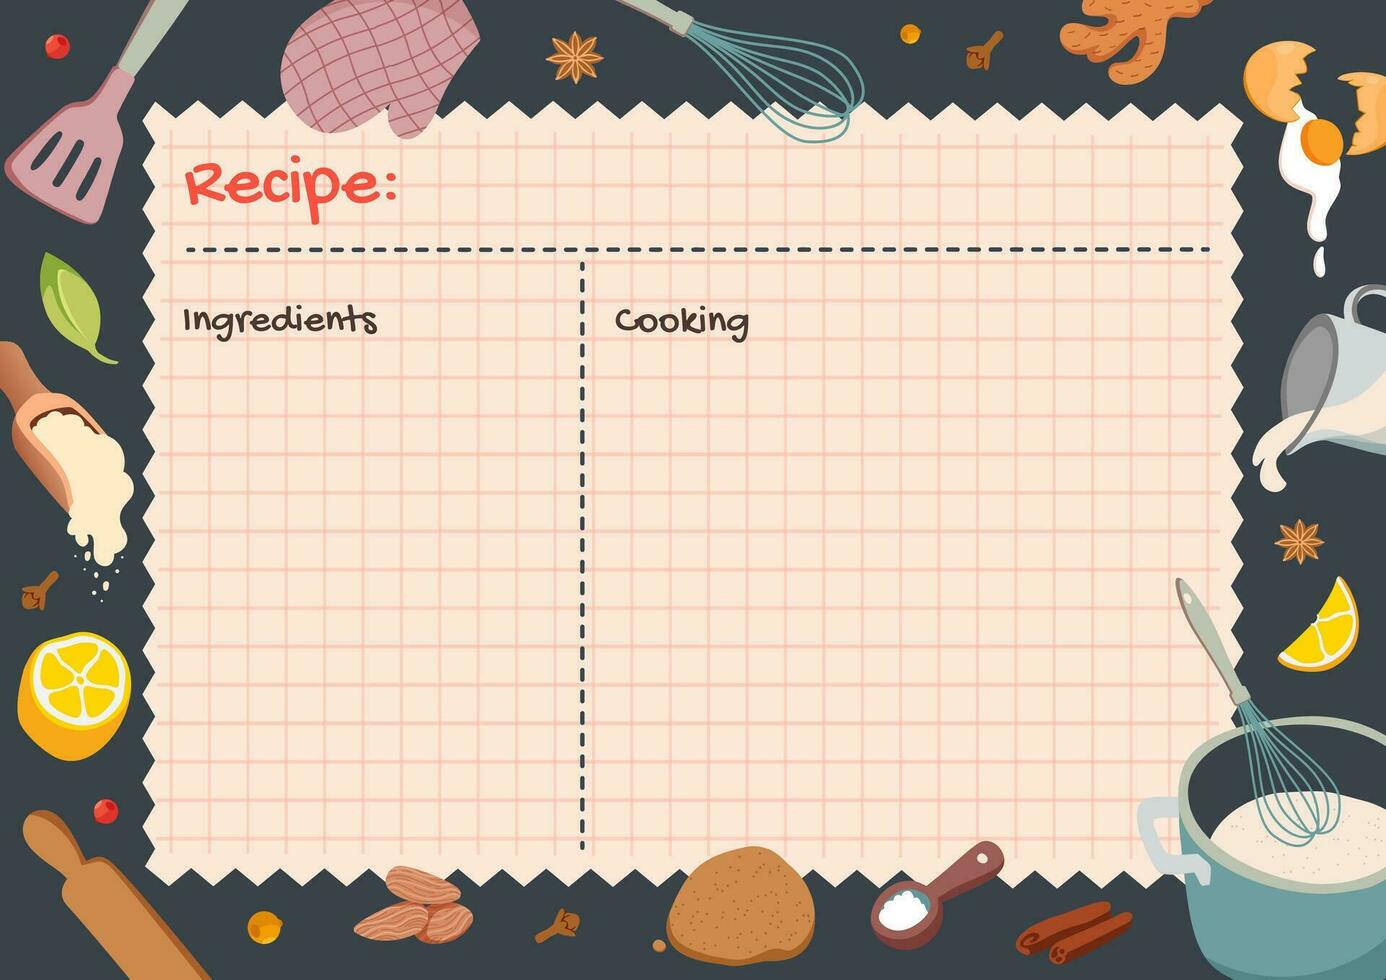 Print recipe card templates for making notes about preparation of food and cooking ingredients. Empty cookbook pages decorated with Food icons and elements. Vector flat illustration.